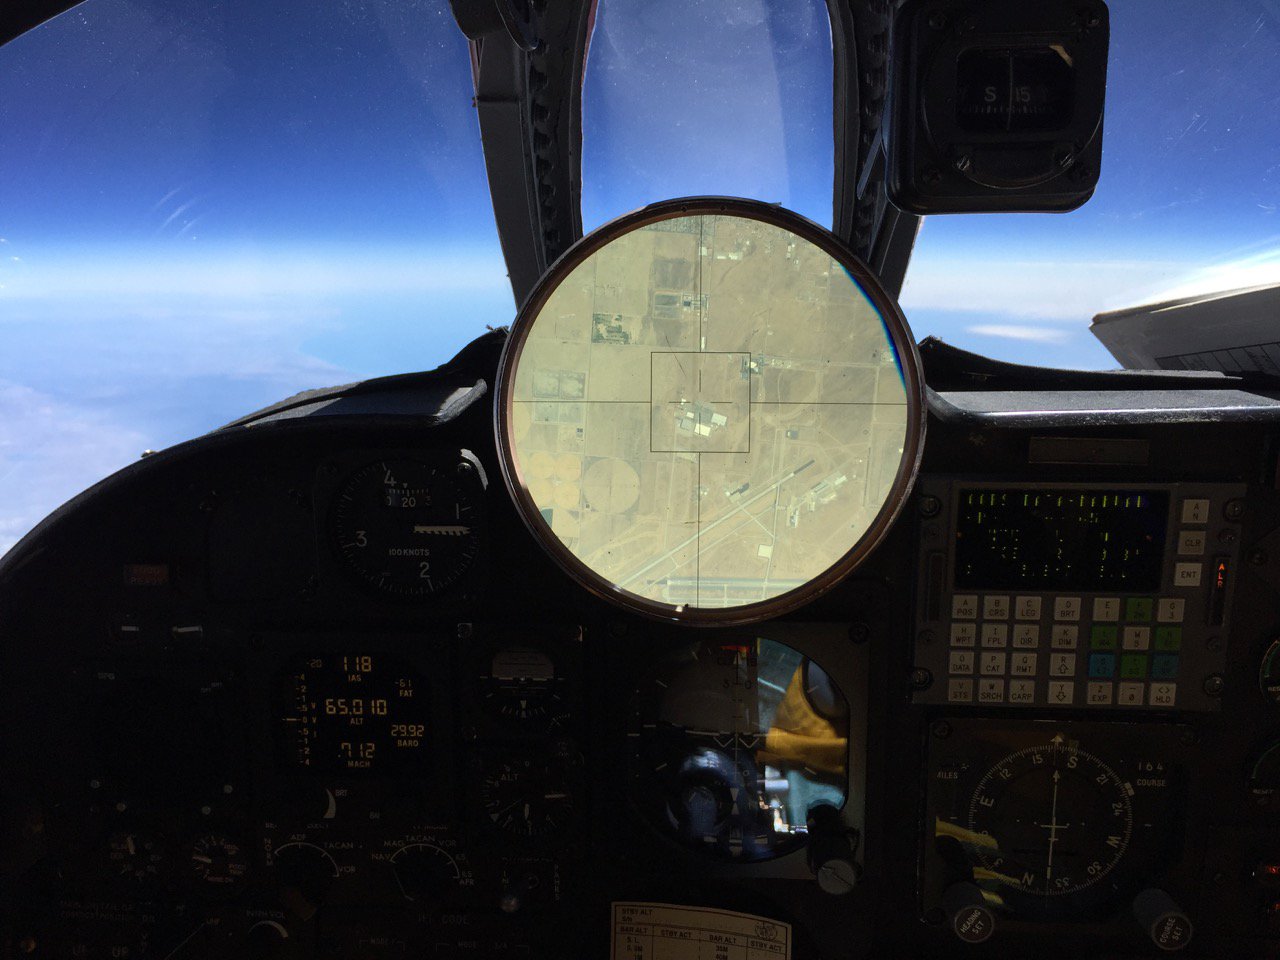 An image of an airplane's cockpit, with various instrument panels visible. The view out of the front of the airplane shows a very deep blue sky above and indistinct looking land below. In the middle of the dash is a large circular instrument showing a much-enlarged view of the ground below the plane, which shows several fields, houses, and runways, and in the center of the crosshairs on the instrument, a few rectangular buildings and parking lots.